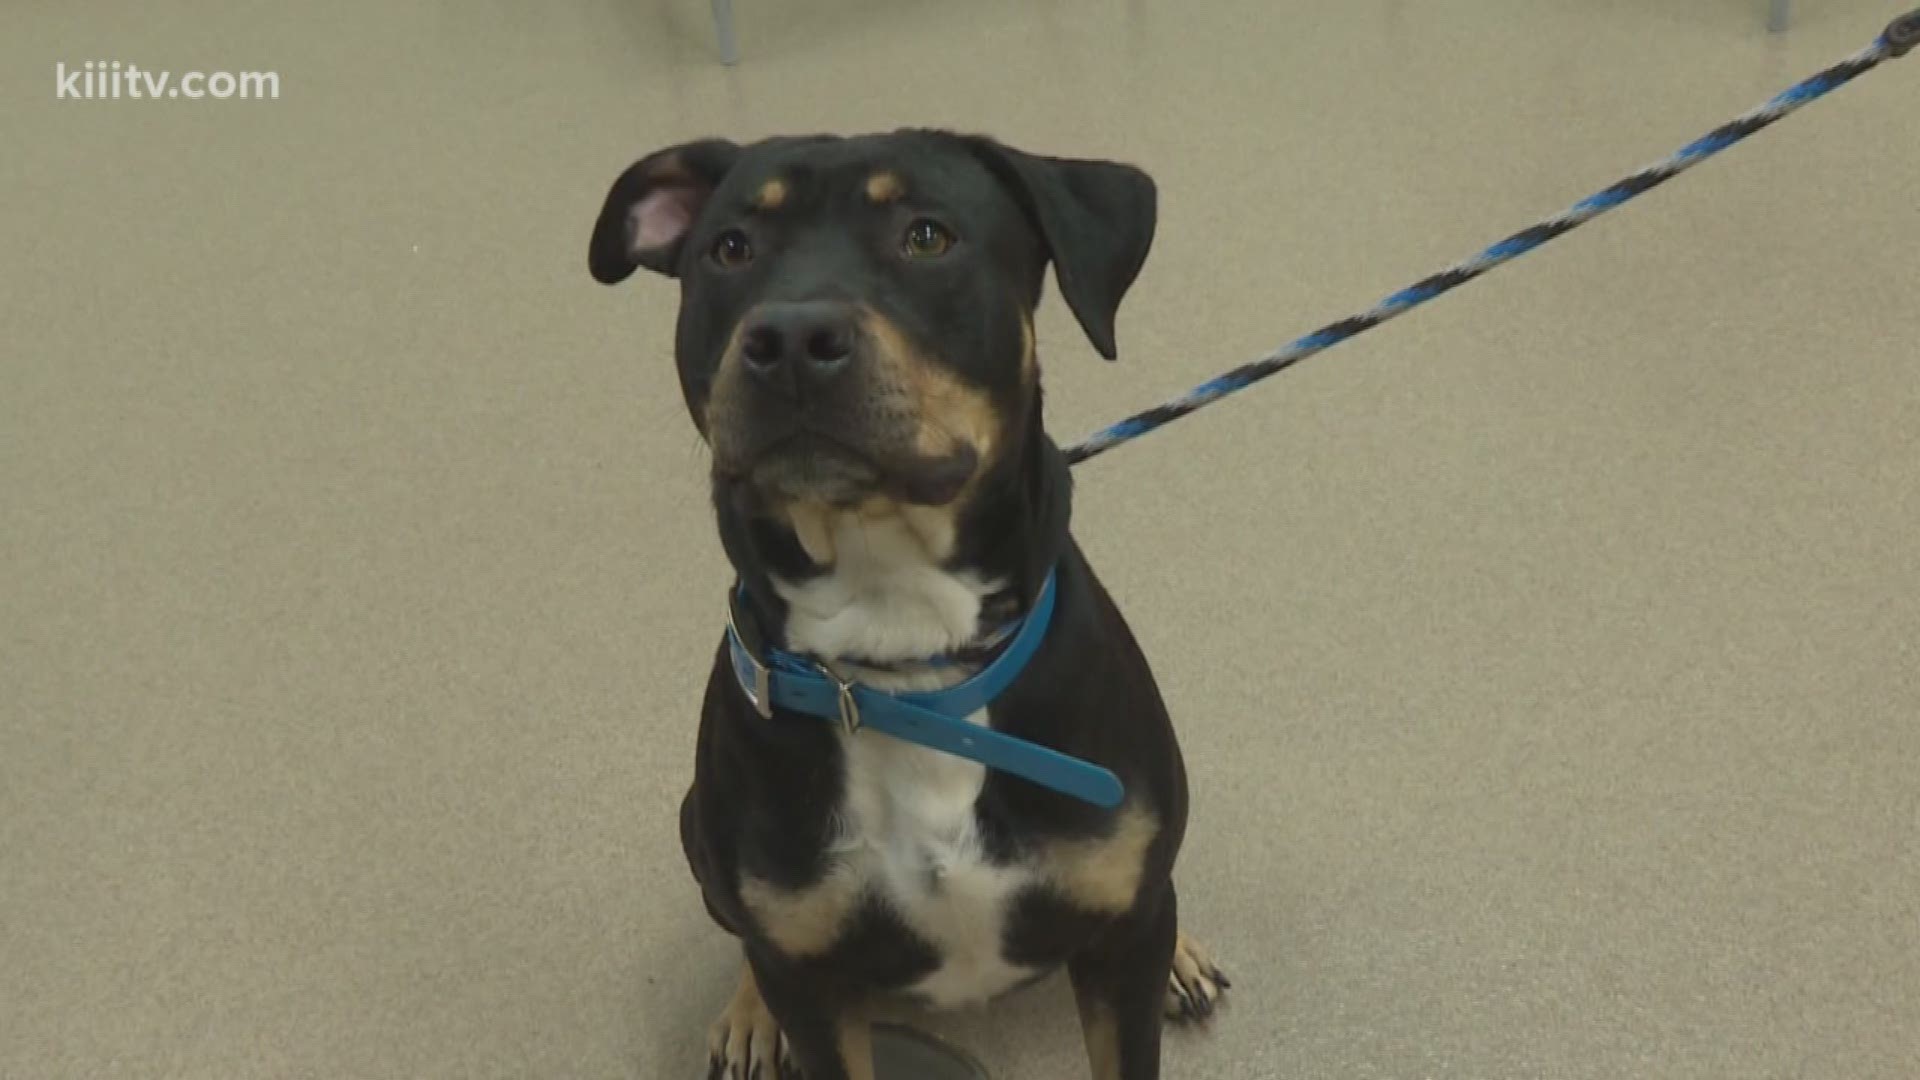 Adopt Tron, a Rottweiler Mix, from the Gulf Coast Humane Society.